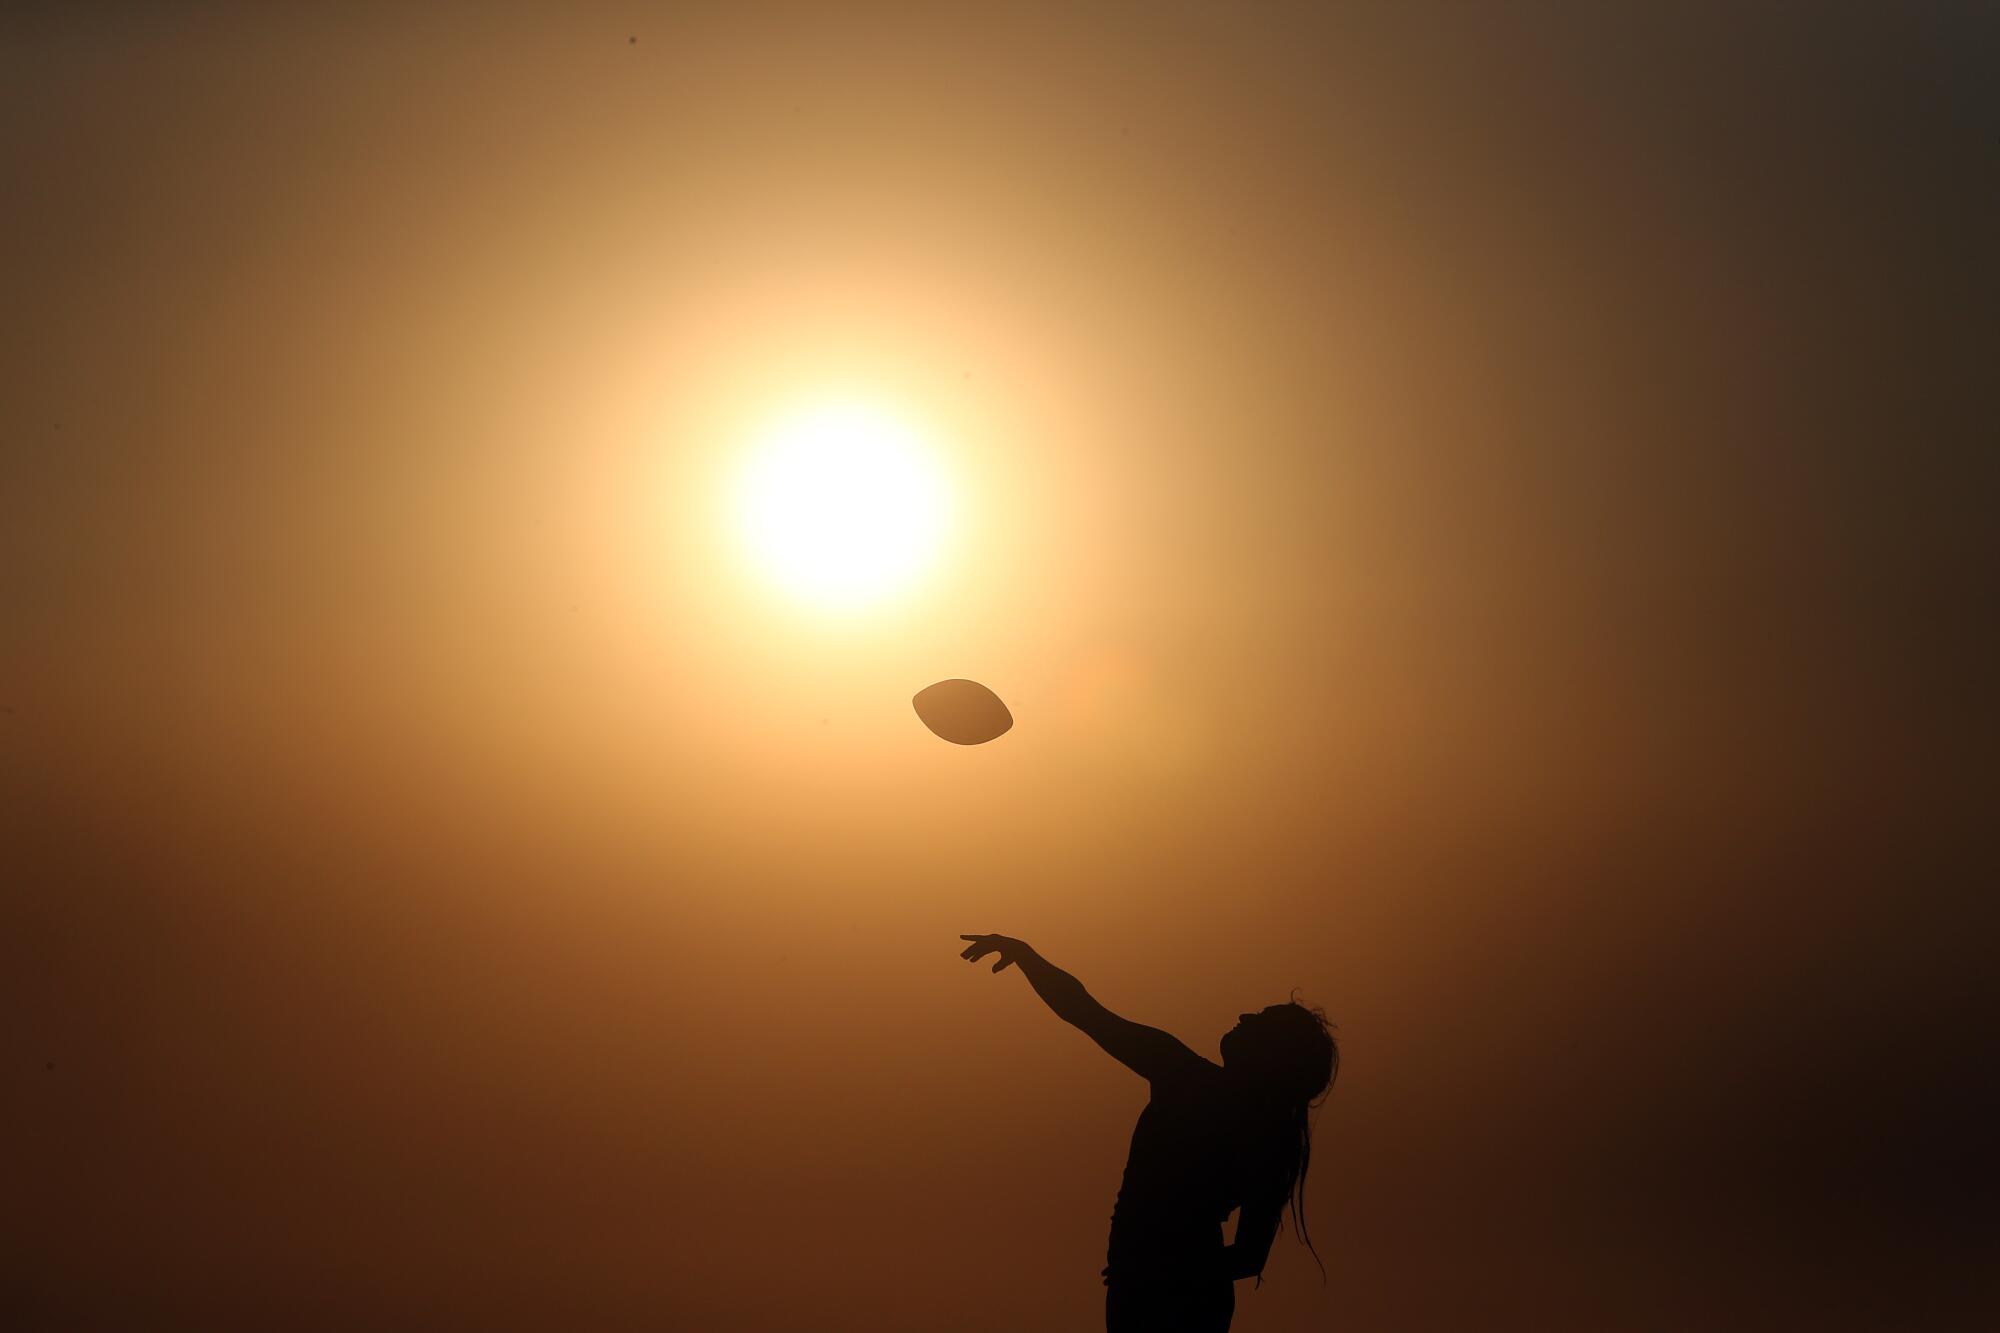 Silhouette of a person throwing a football in front of a yellow sun at the beach